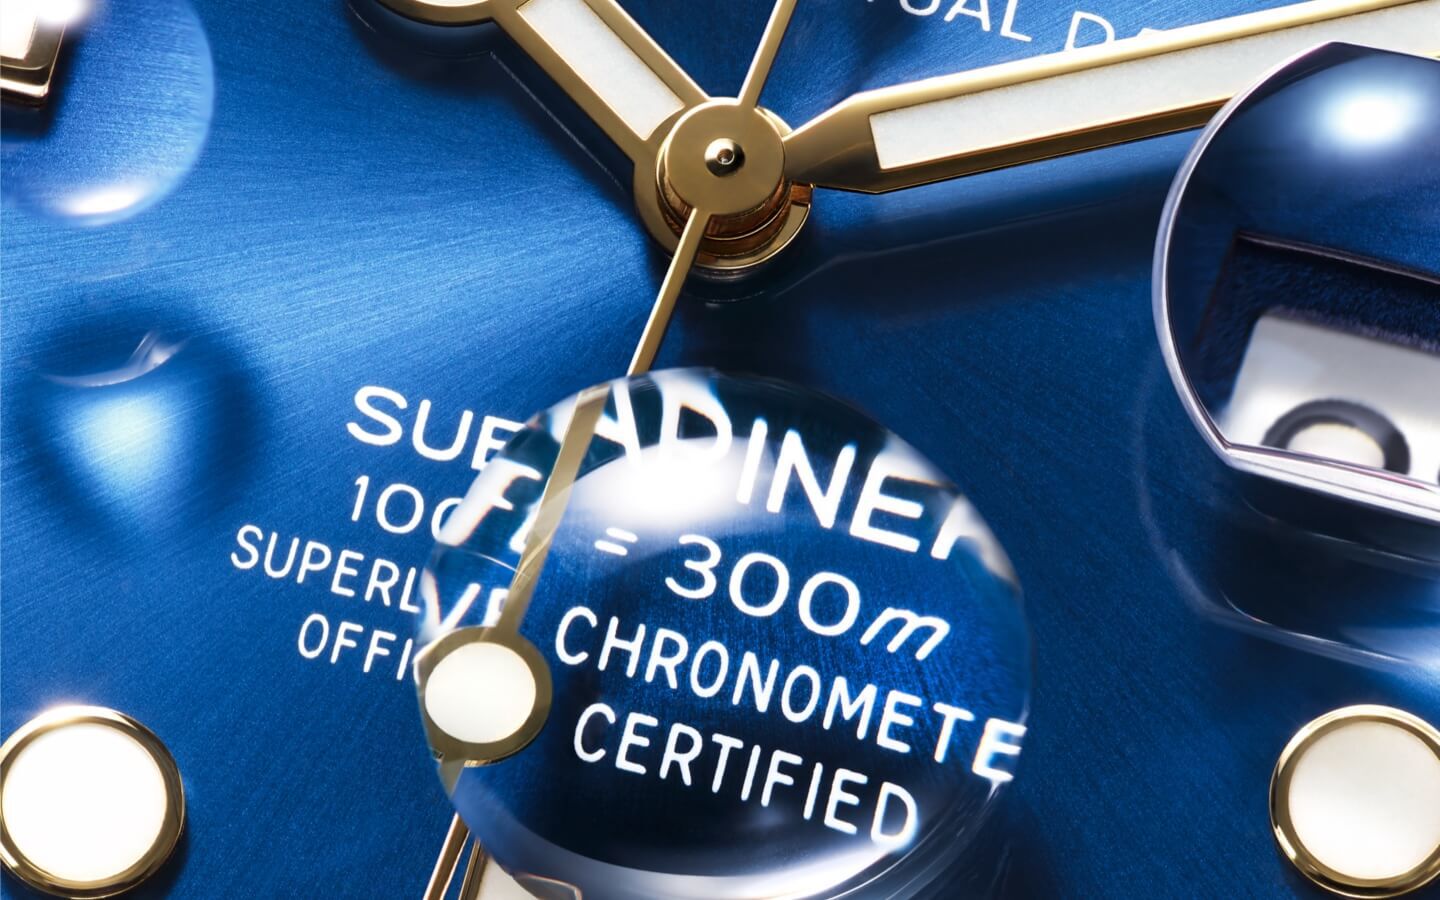 Oyster Perpetual Submariner with a blue dial and drop of water magnifying some of the words on the face